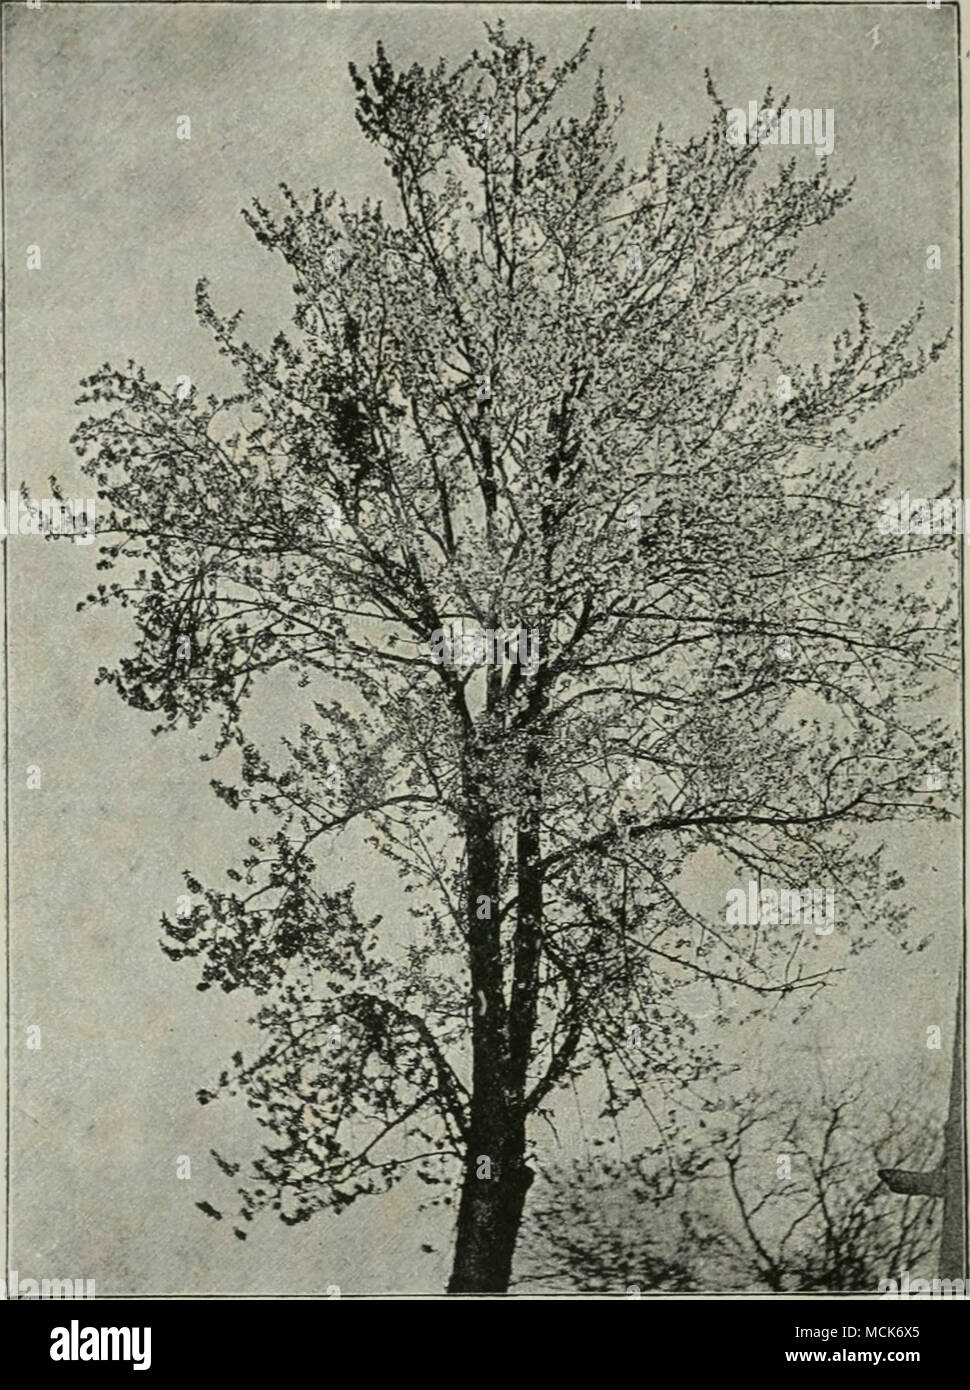 . Fig. 57.—Exoascus cerasi on Prunus droius. Cherry-tree iii blossom, with the exception of four witches' brooms. The tree is as yet leafless except the brooms, which are in full foliage and show up dark. (v. Tubeuf phot.; Exoascus carpini Eostr. is common on Carpinus Beiulus (horn- beam) (Fig. 55). The brooms produced are bushy and densely leafed; the twigs are thickened and much branched; the leaves Stock Photo